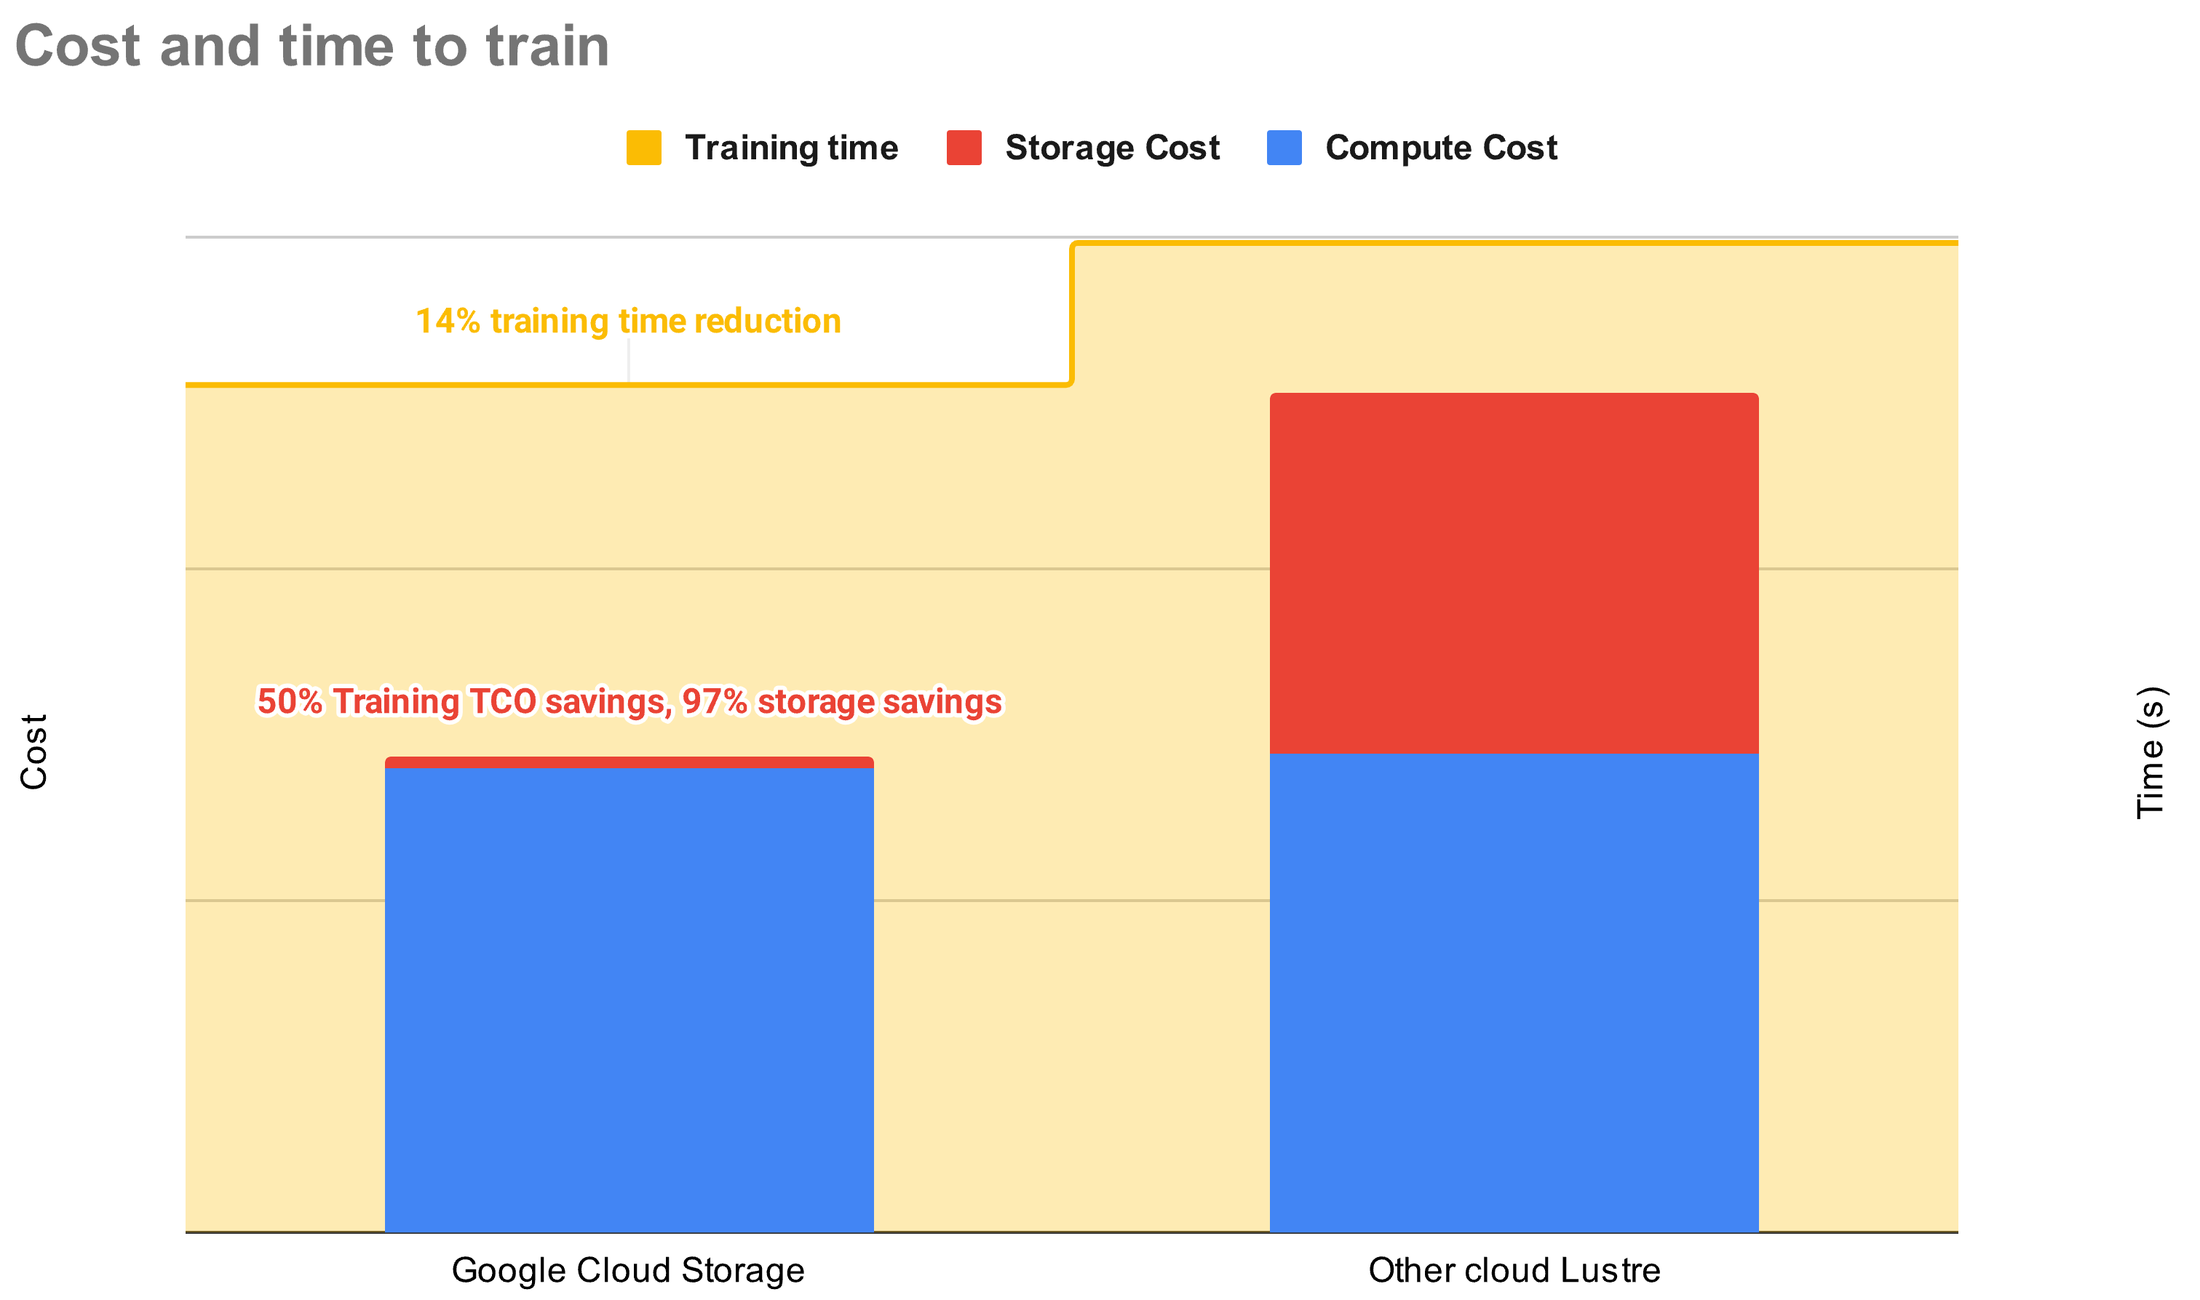 http://storage.googleapis.com/gweb-cloudblog-publish/images/Cost_Time_To_Train.max-2200x2200.png